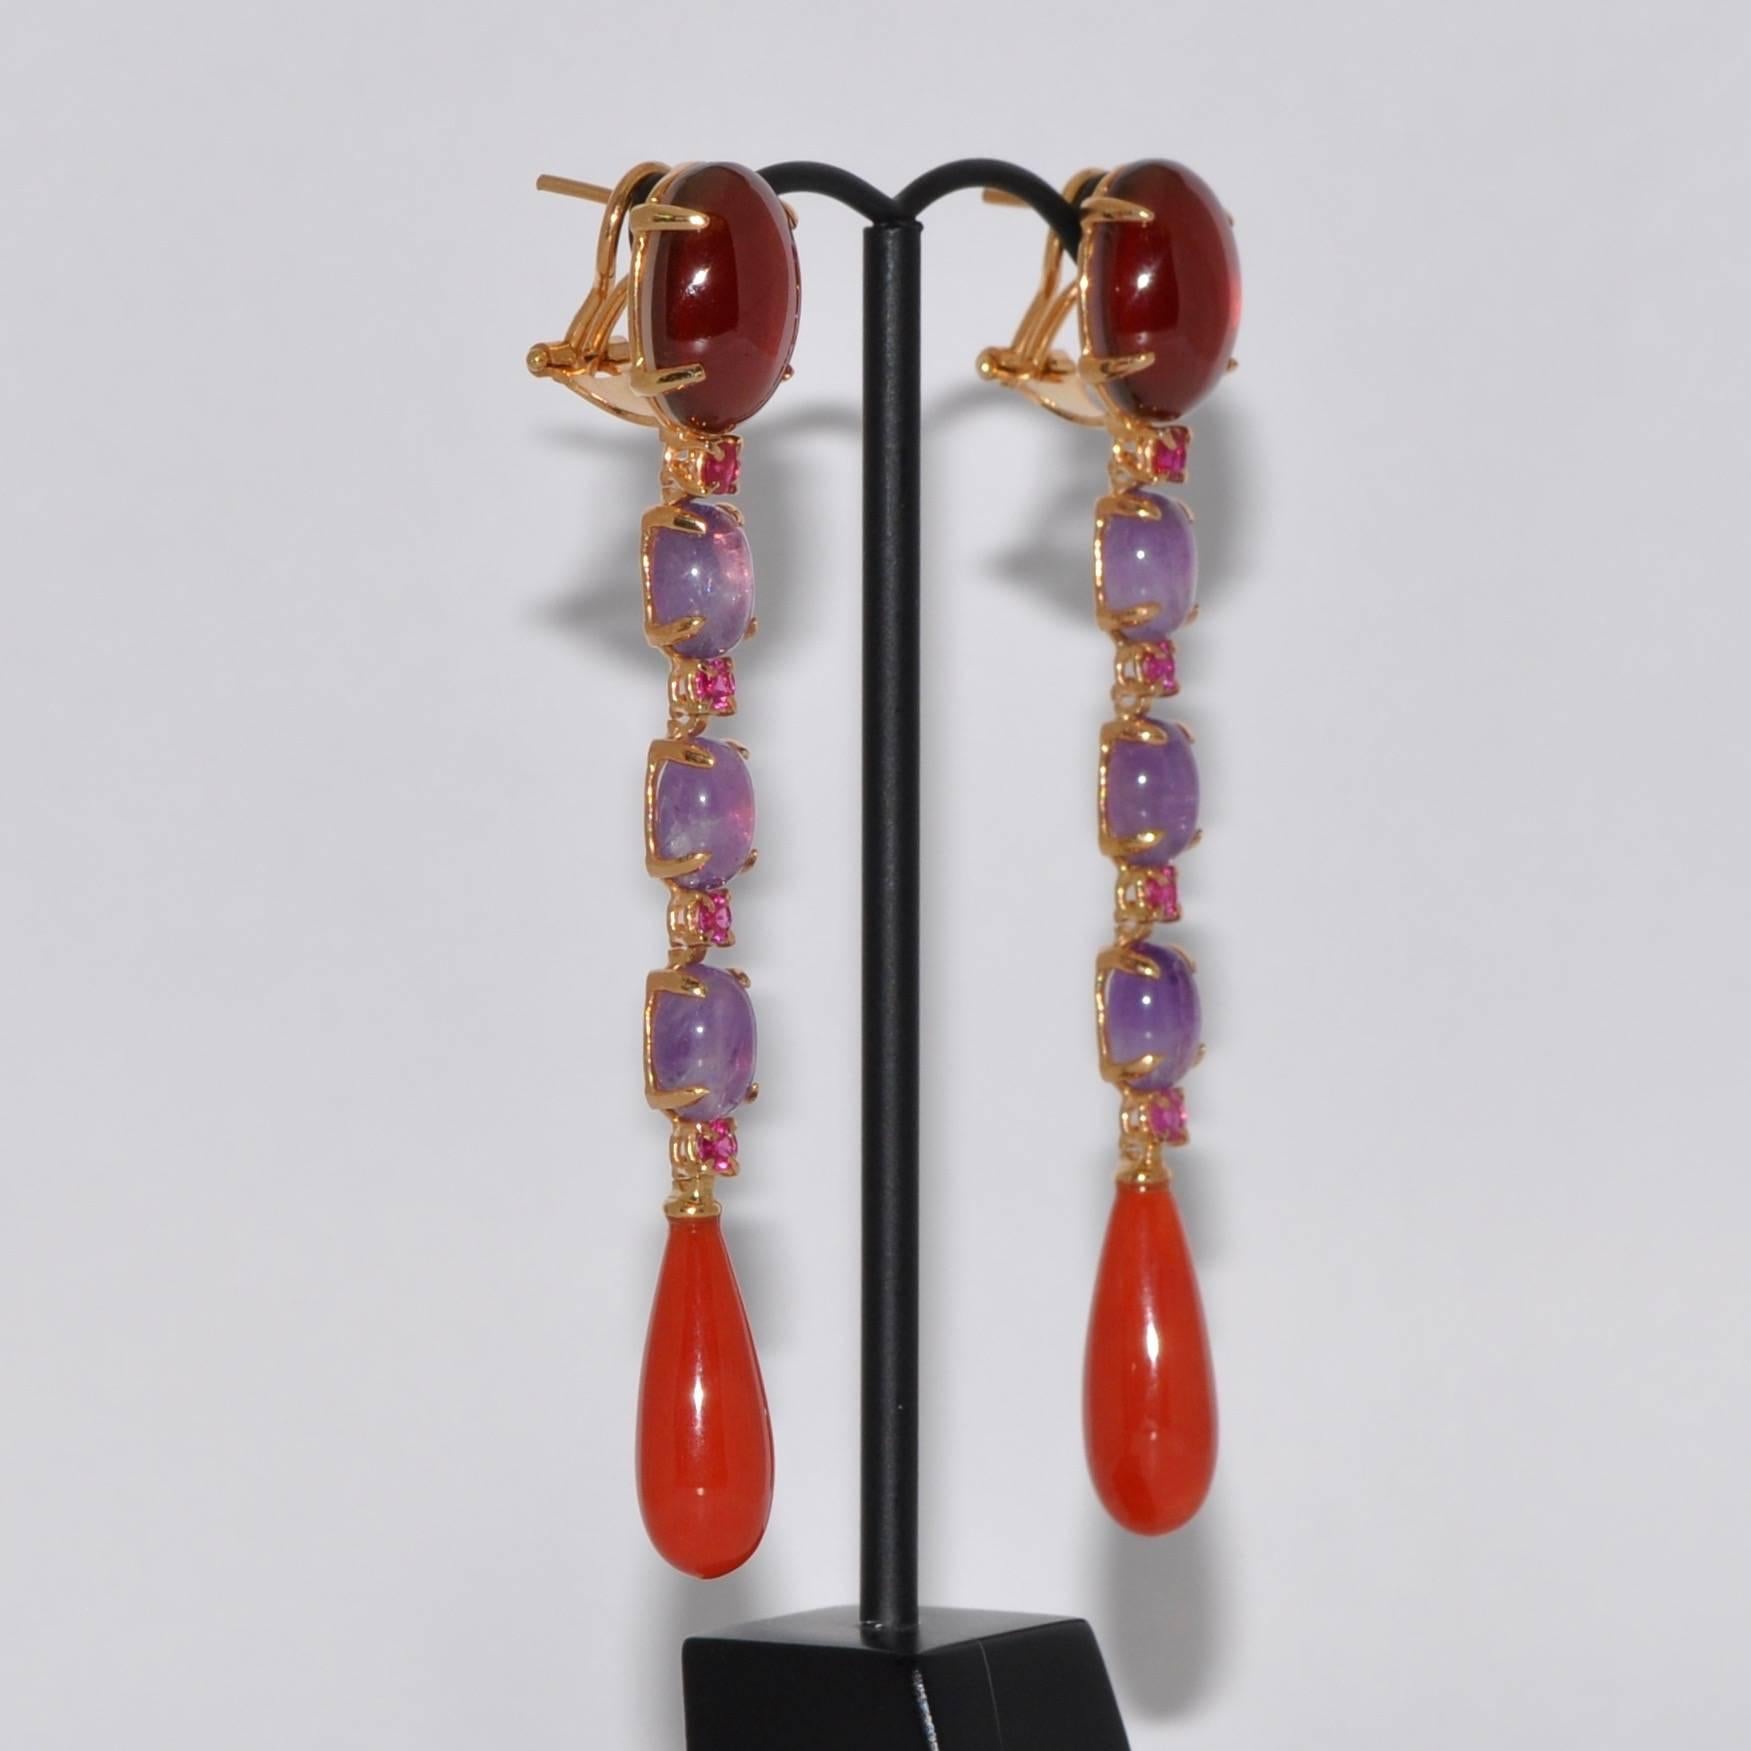 Discover this Coral, Garnet, Amethyst and Ruby on Yellow Gold Chandelier Earrings.
Coral
Garnet 
Amethyst 
Ruby 0.56 Carat
Yellow Gold 18 Carat